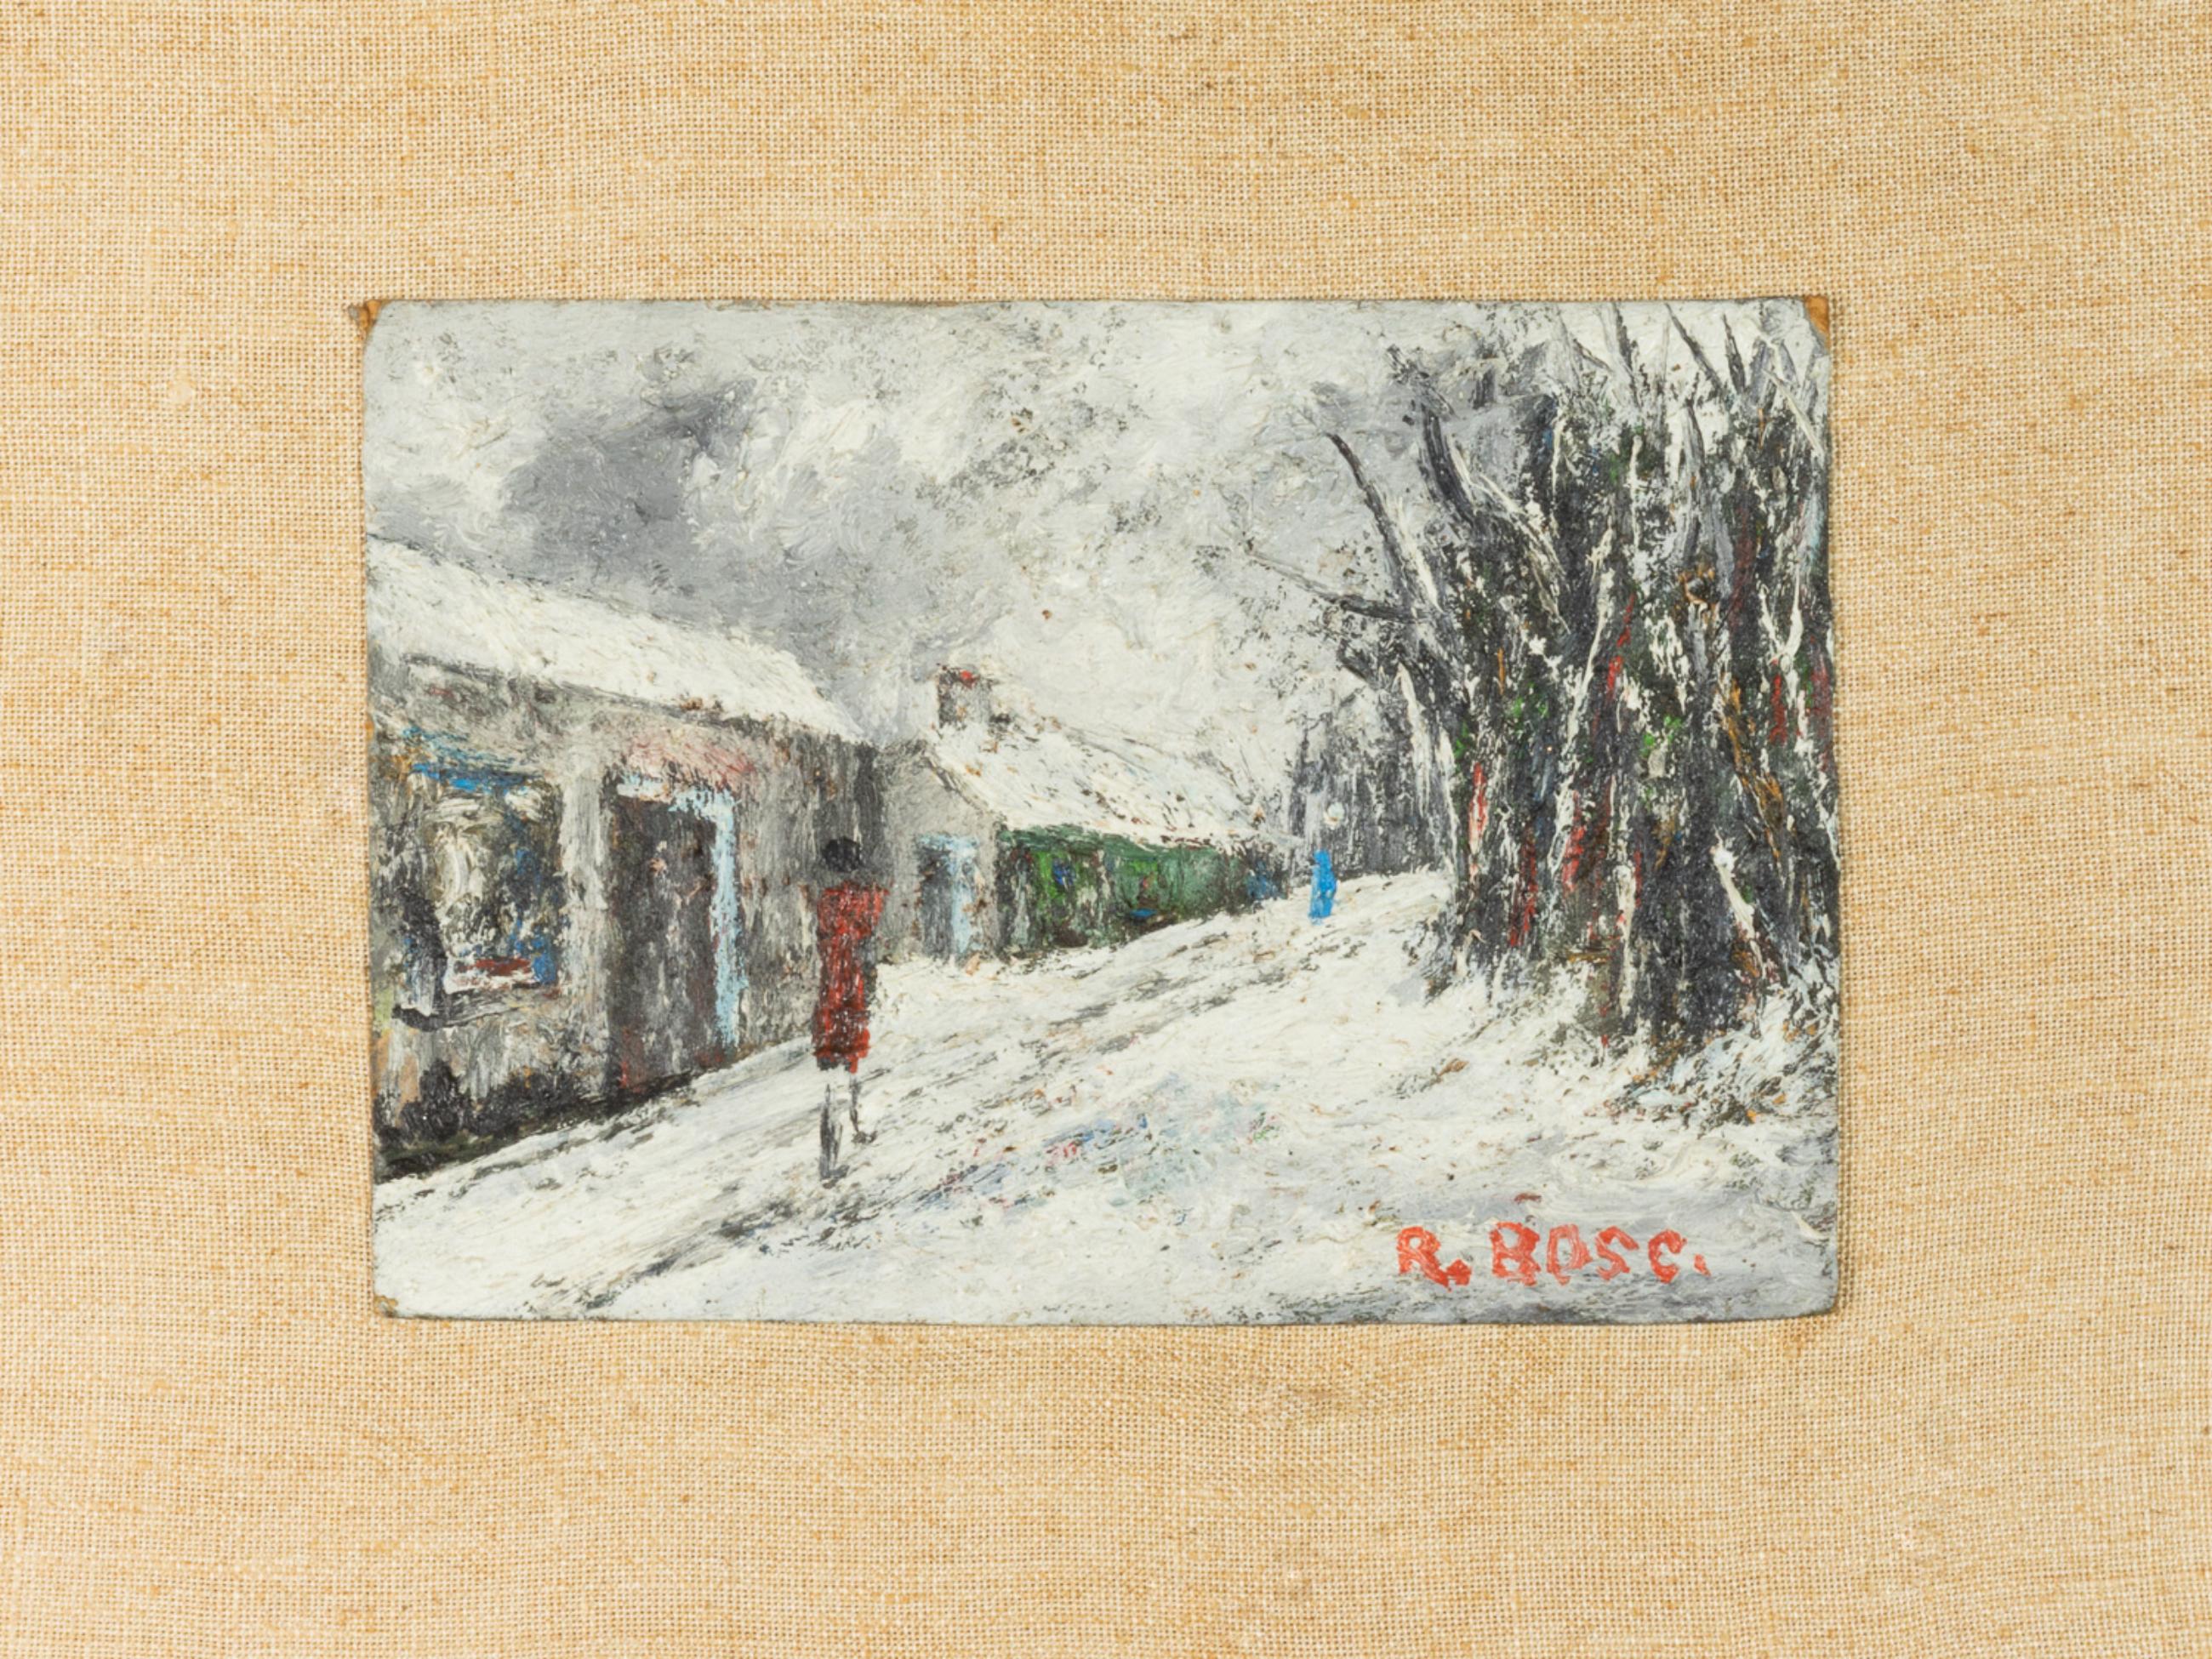 An early 20th century oil painting on a composite panel of Winter landscape painting with snow of people walking in the Bosque de Bologna.
“R . Bosc” signed.
Style: Post-Impressionism
Medium: Oil on Composite Panel

WidthFrame 14,37 in (36,5 cm)